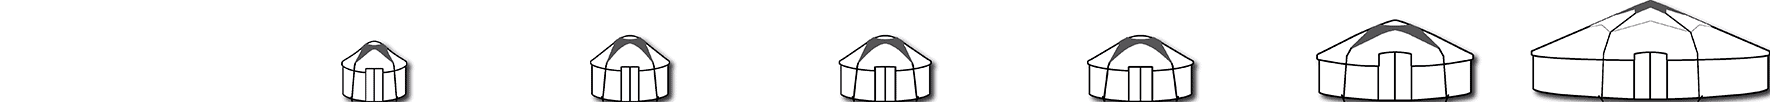 All Sizes of Yurts For Sale Icons